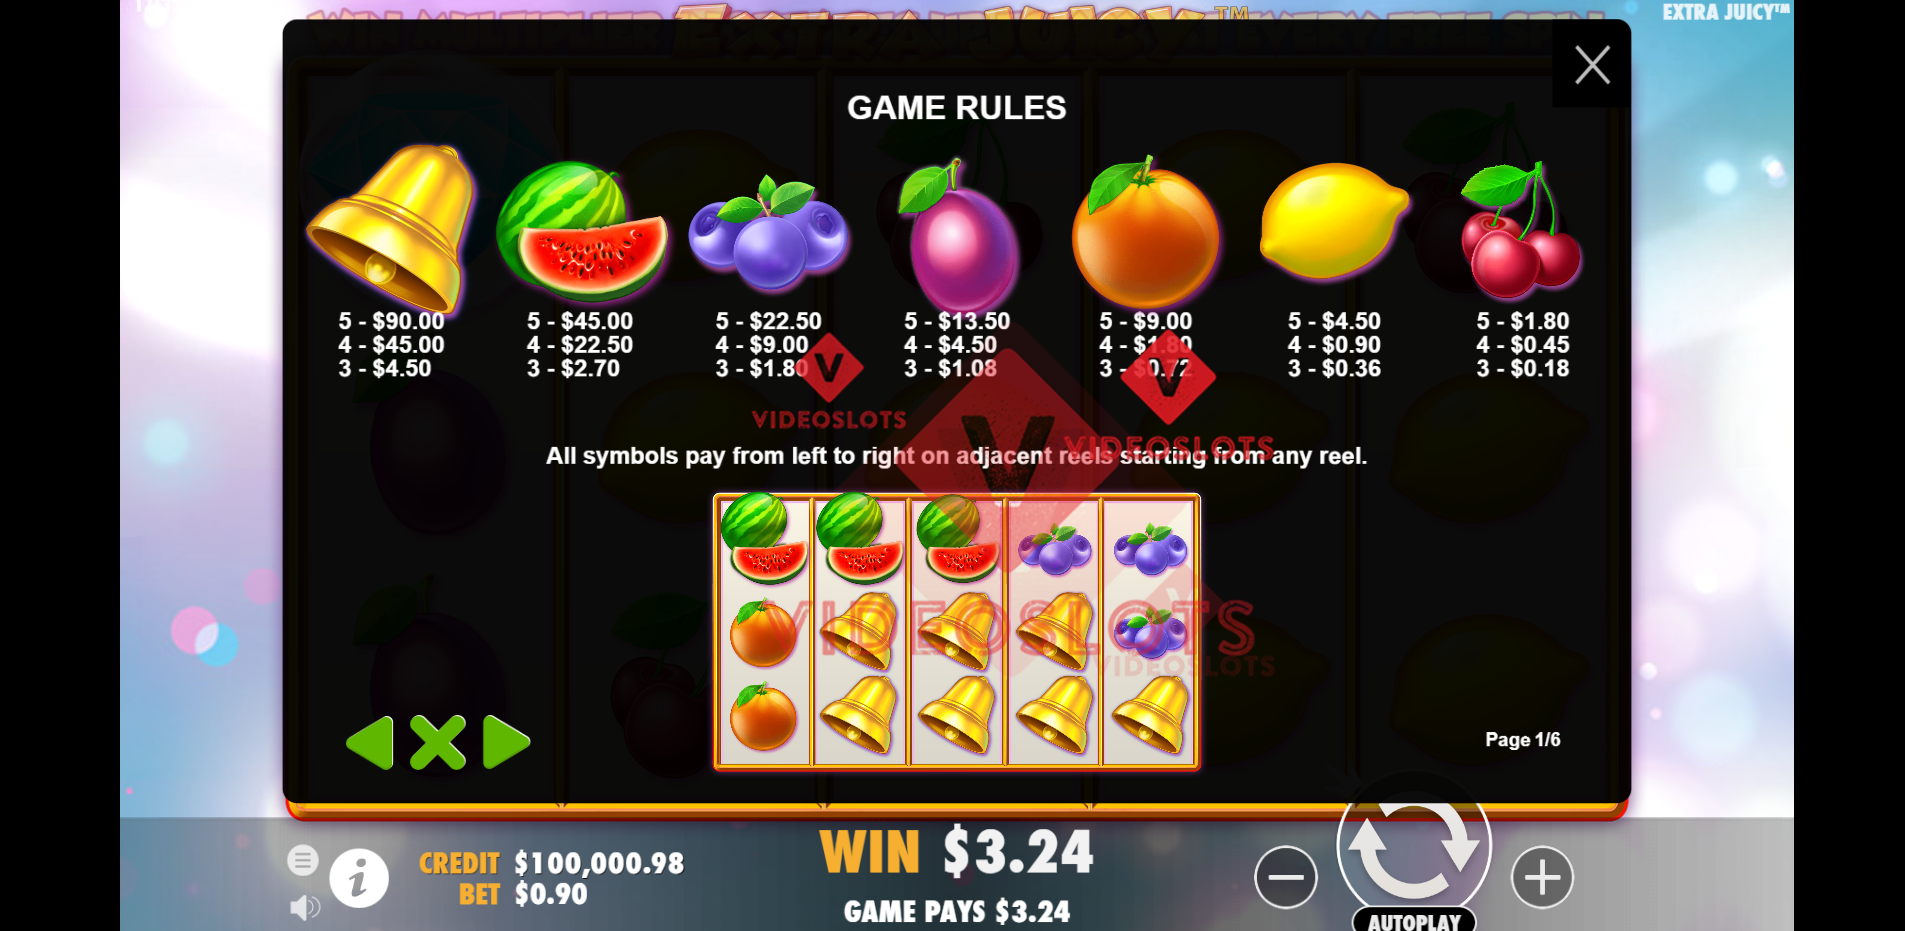 Pay Table for Extra Juicy slot by Pragmatic Play